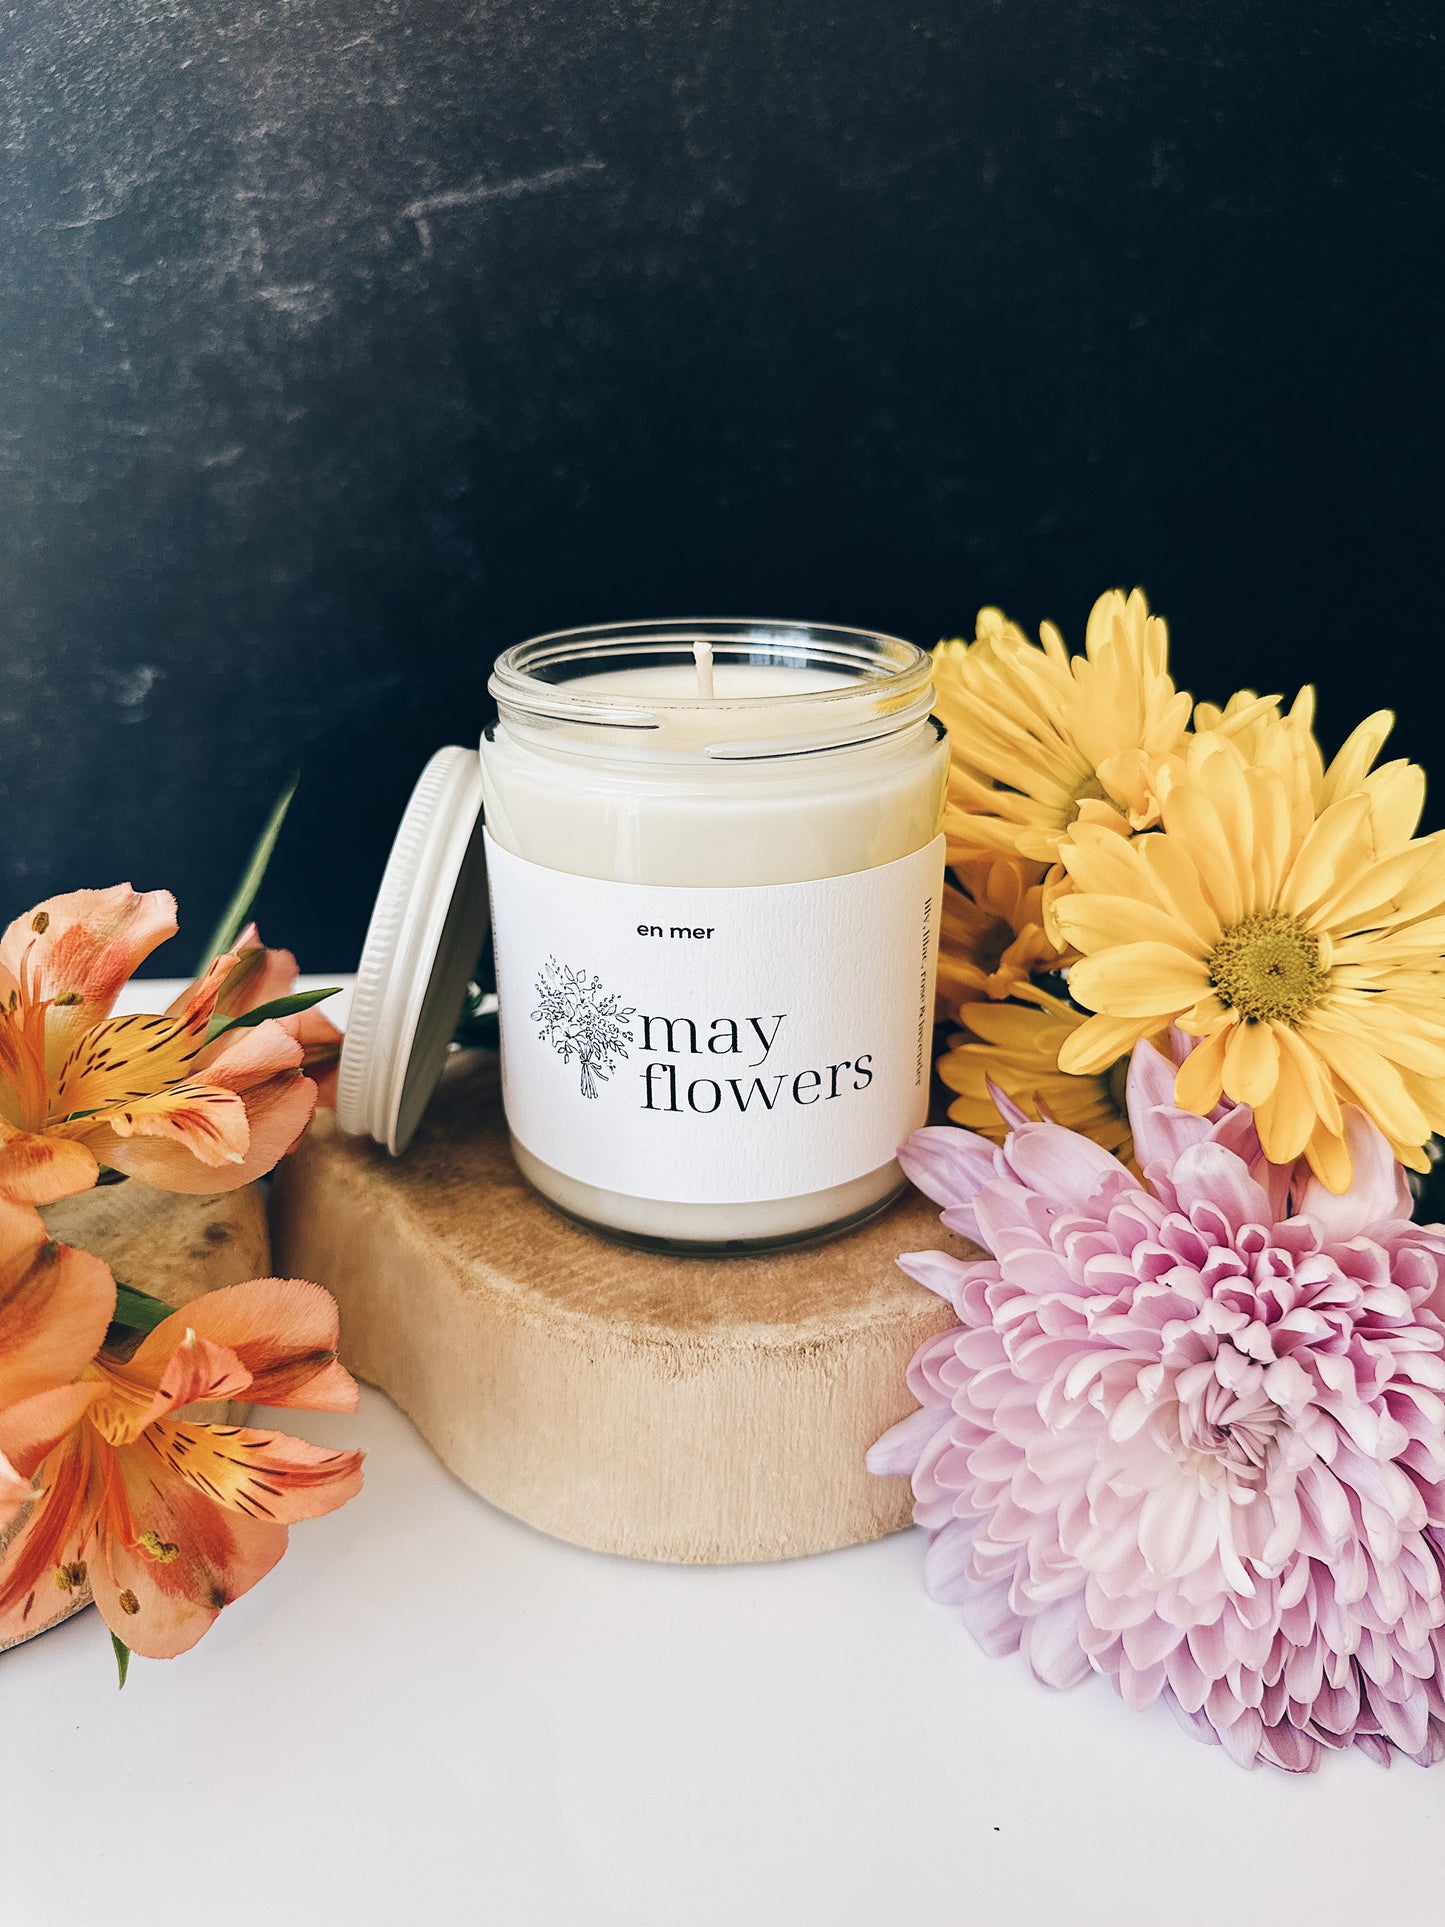 en mer | may flowers | soy wax candle & melts